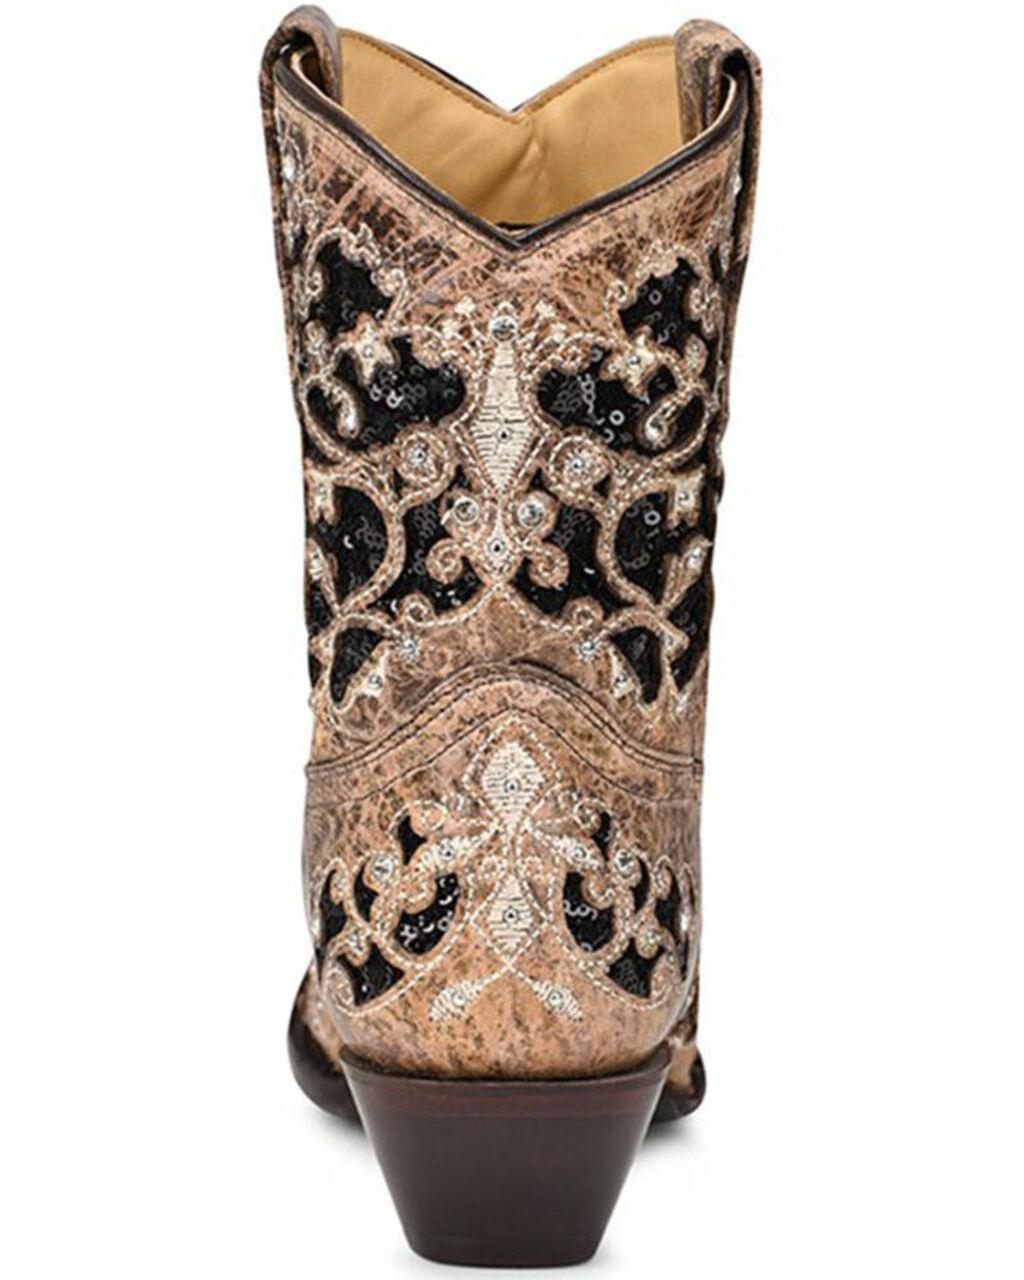 A4190 BROWN INLAY & EMBROIDERY & STUDS & CRYSTALS ANKLE BOOTS FOR WOMEN-Kuet.us